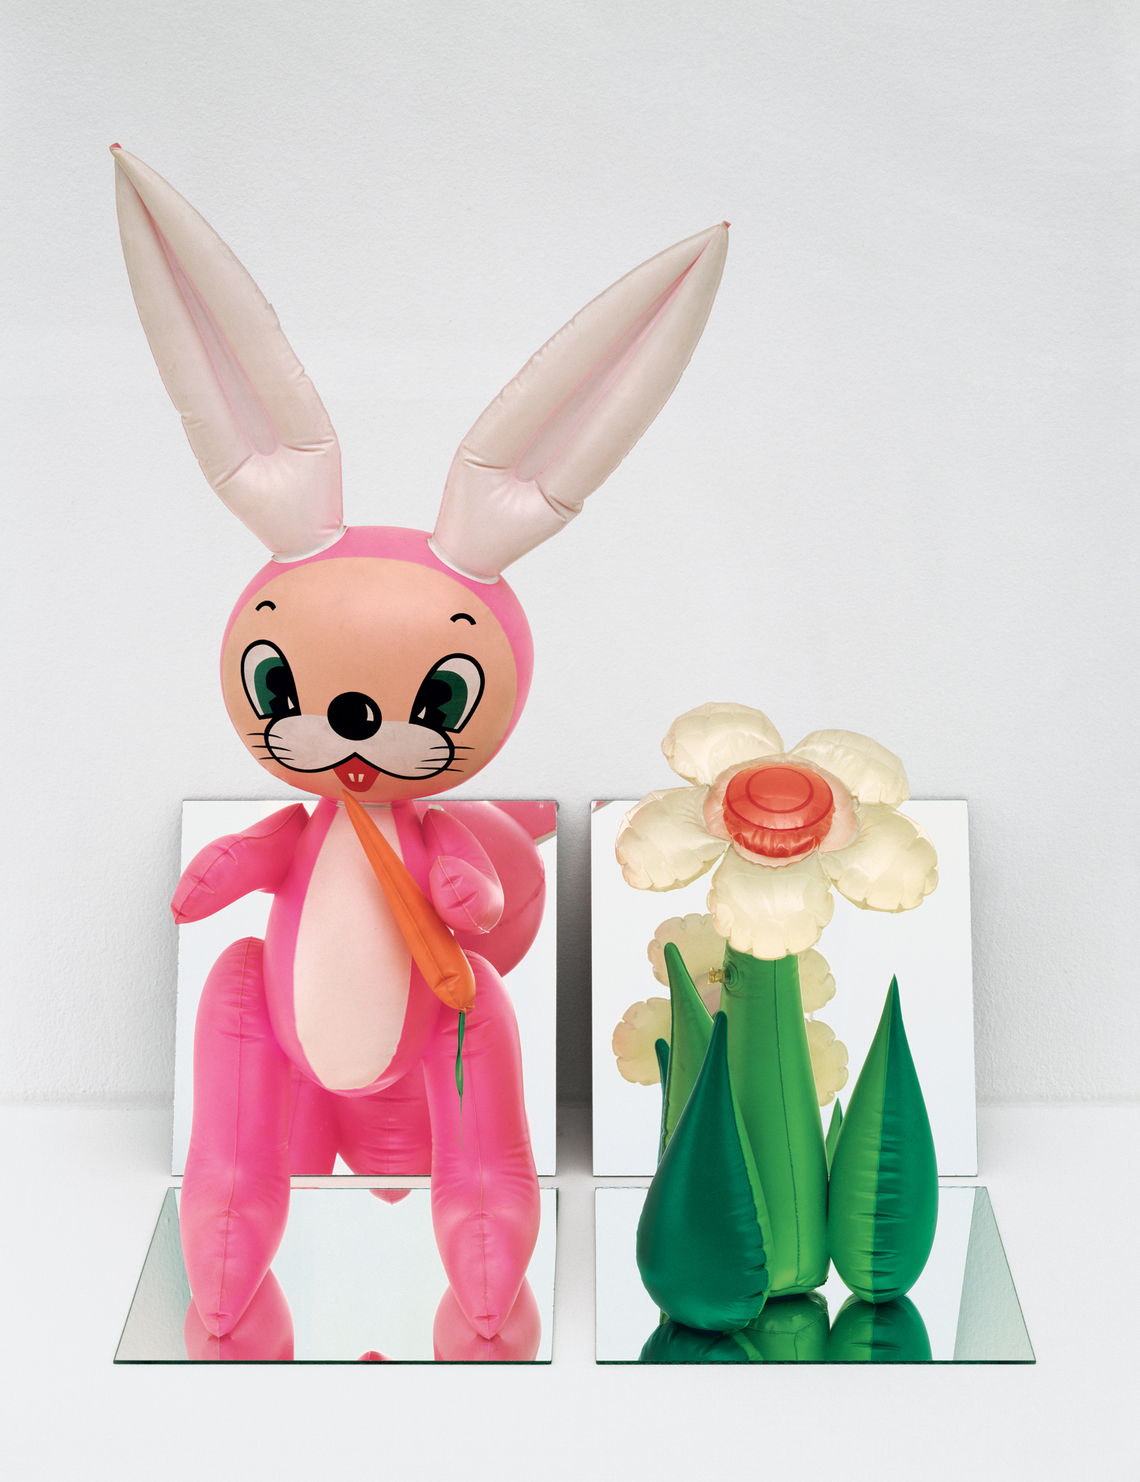 Jeff Koons, Inflatable Flower and Bunny (Tall White, Pink Bunny), 1979. Vinyl and mirrors; 32 × 25 × 19 in. (81.3 × 63.5 × 48.3 cm). The Broad Art Foundation, Santa Monica. © Jeff Koons